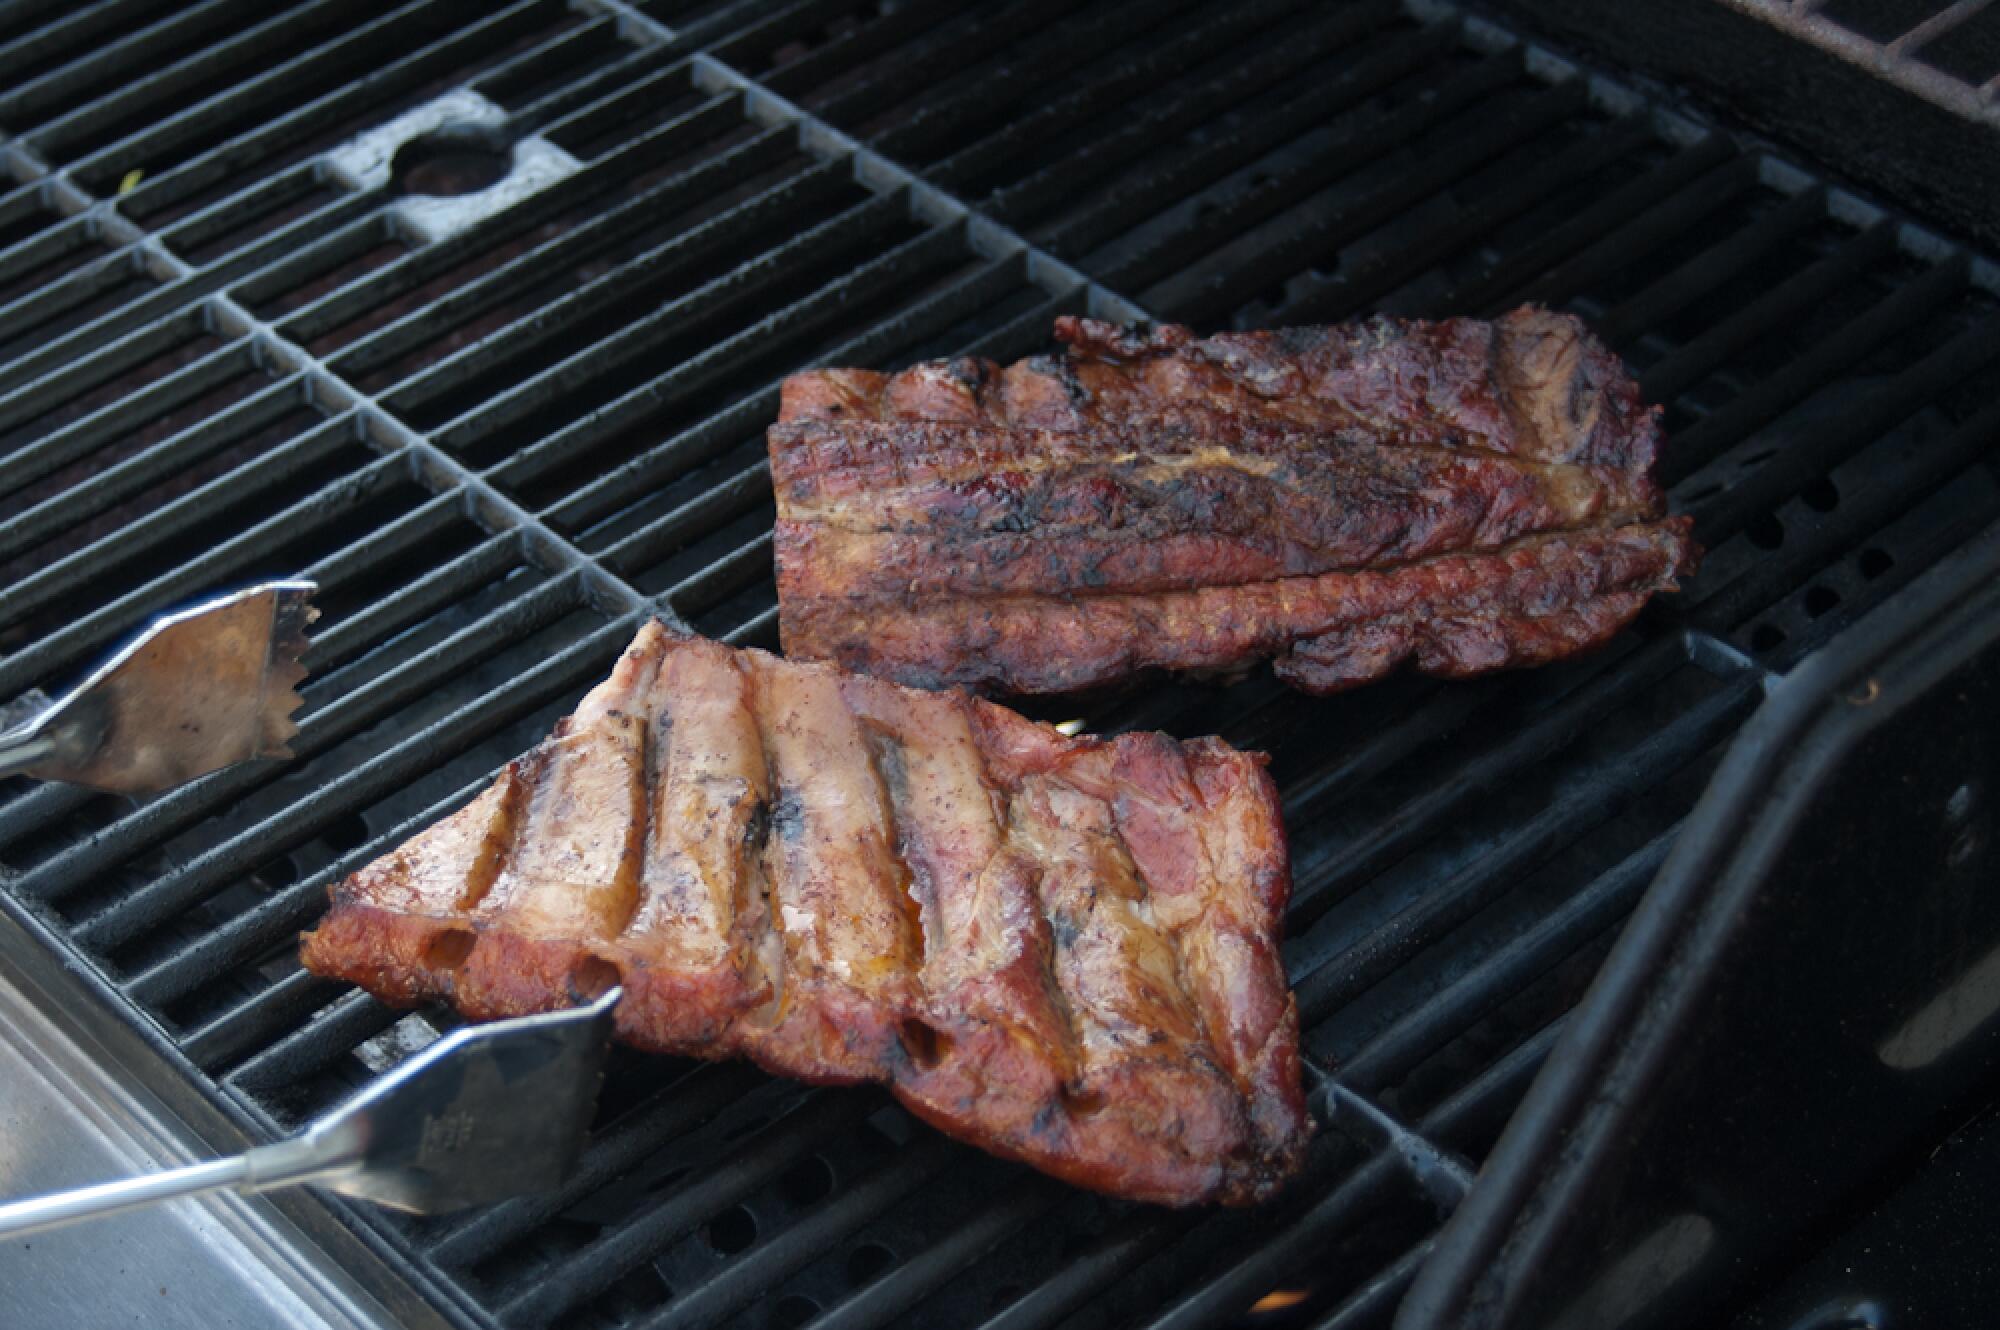 Two slabs of ribs on a grill